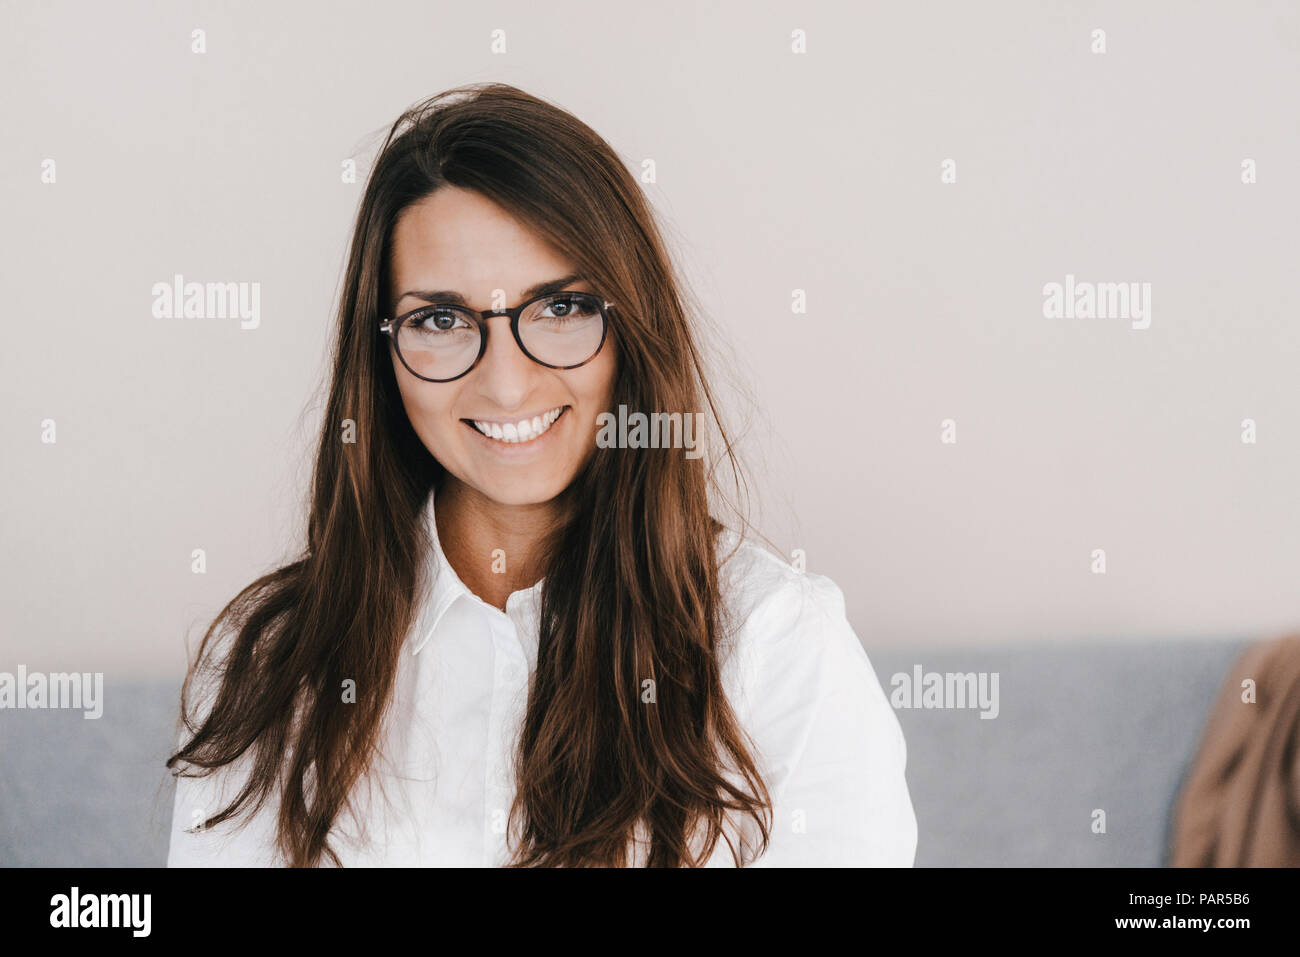 Portrait of a pretty, clever, young woman, wearing glasses Stock Photo